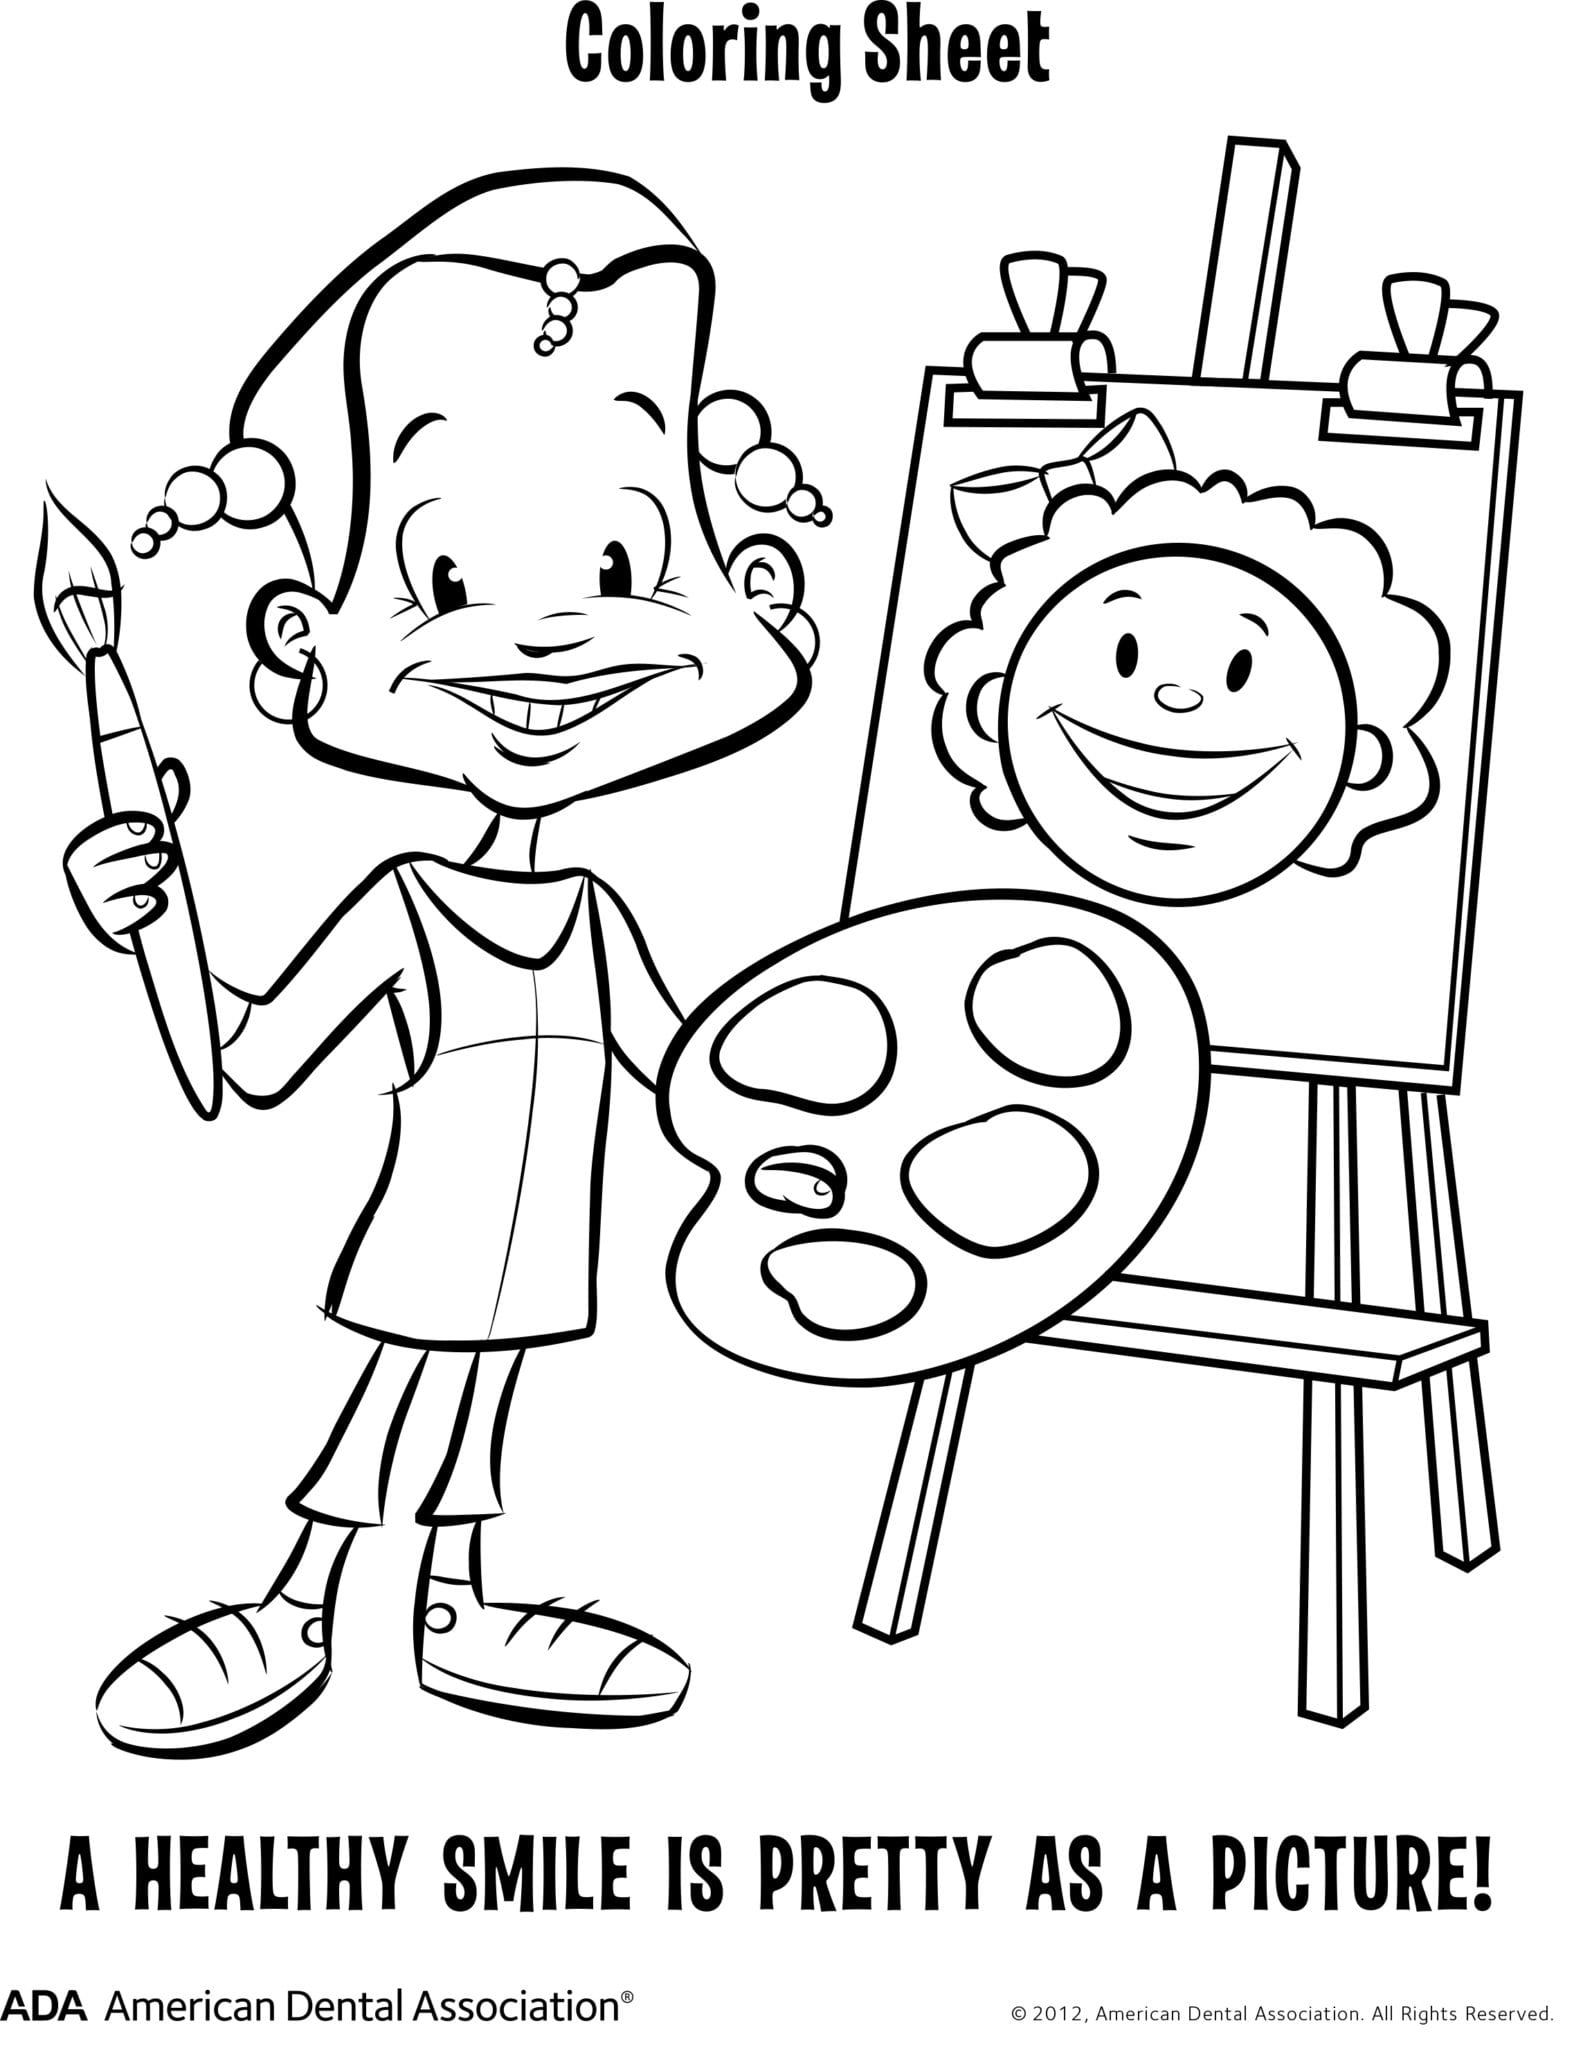 printable coloring page that depicts a child painting a face with a smile